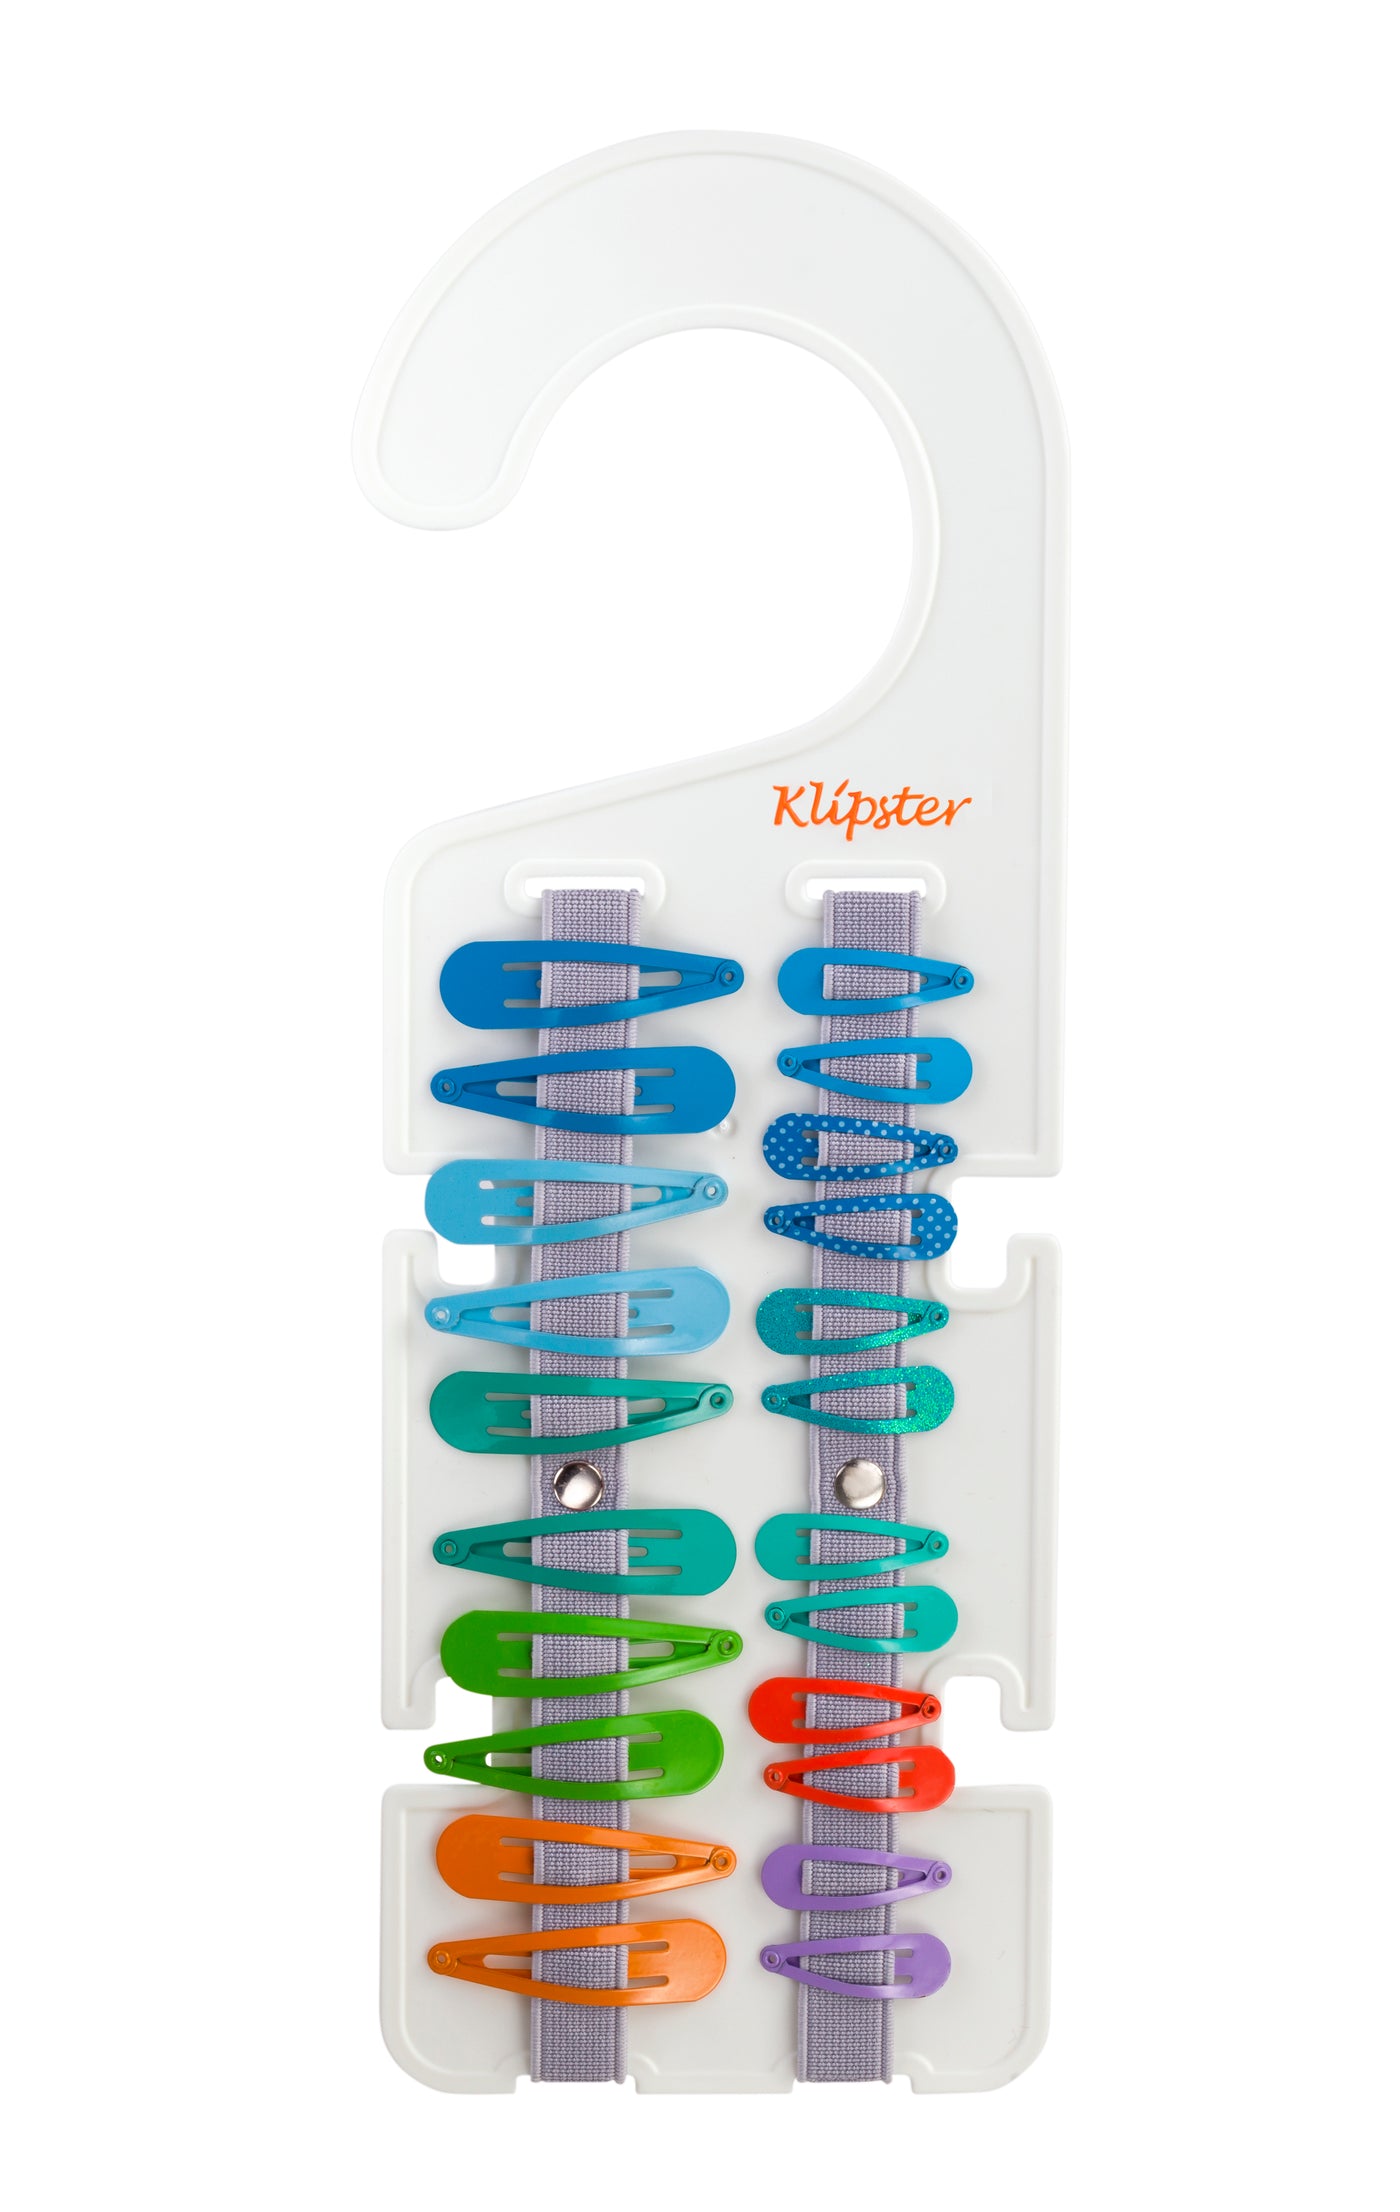 Multi-colored clips on the Classic Klipster hair accessories organizer. Double-sided, lightweight, and compact way to store hair clips, hair bows, scrunchies, hair ties, and more.